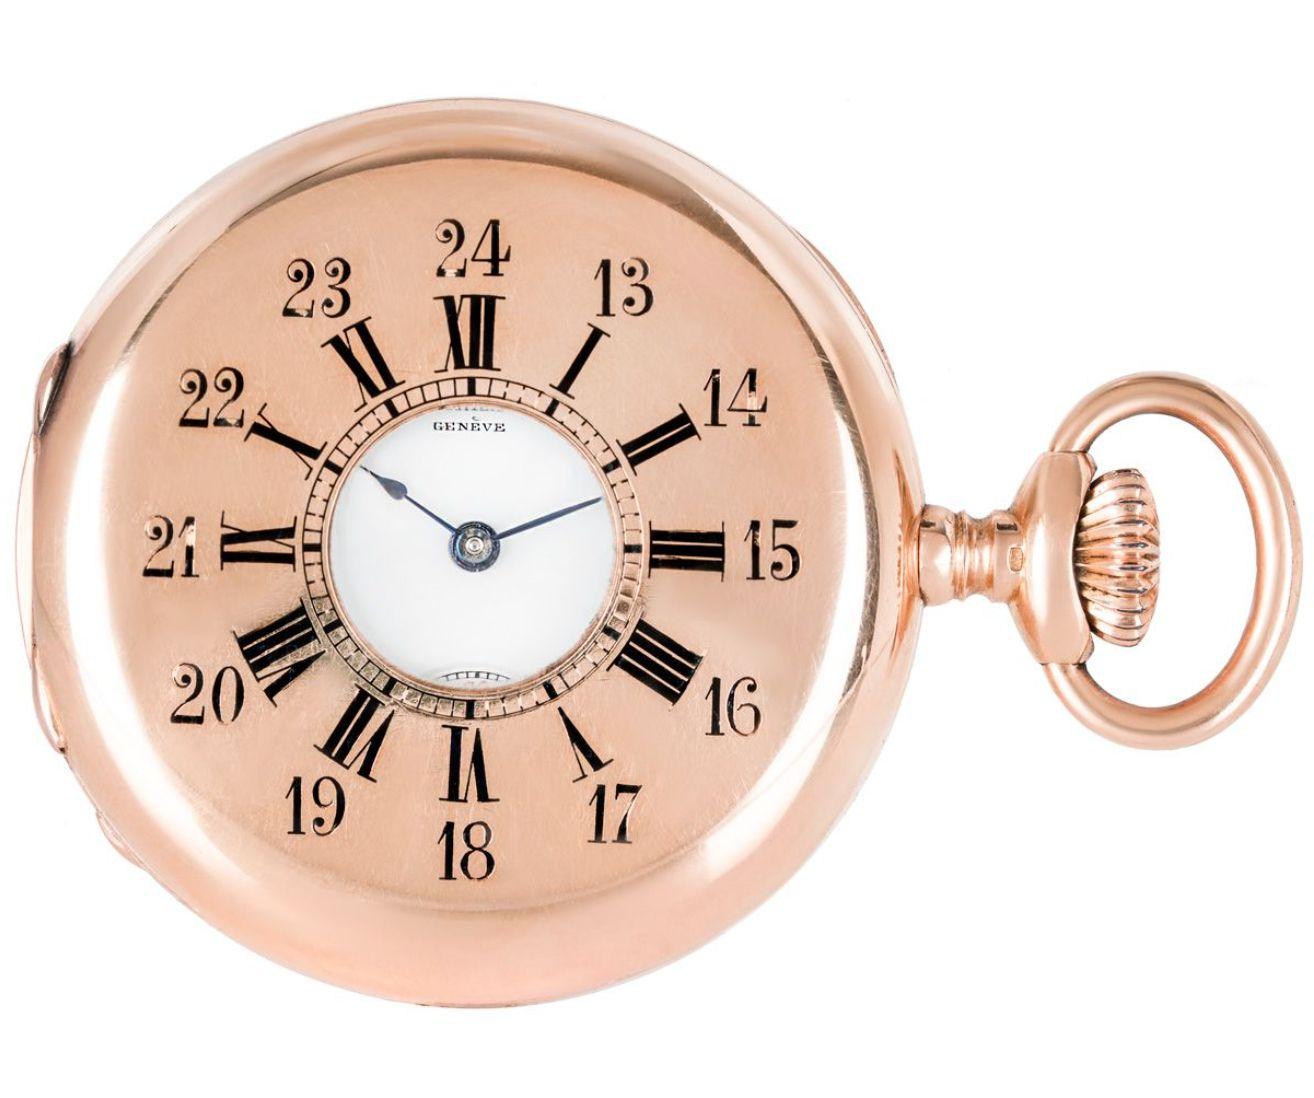 Patek Philippe. A Very Rare Rose Gold Early Half Hunter Keyless Lever Pocket Watch C1880 with Original Box which is Numbered and it's Original Certificate

Dial: The rare and unusual white enamel dial signed Patek Philippe & Co Genève with Roman